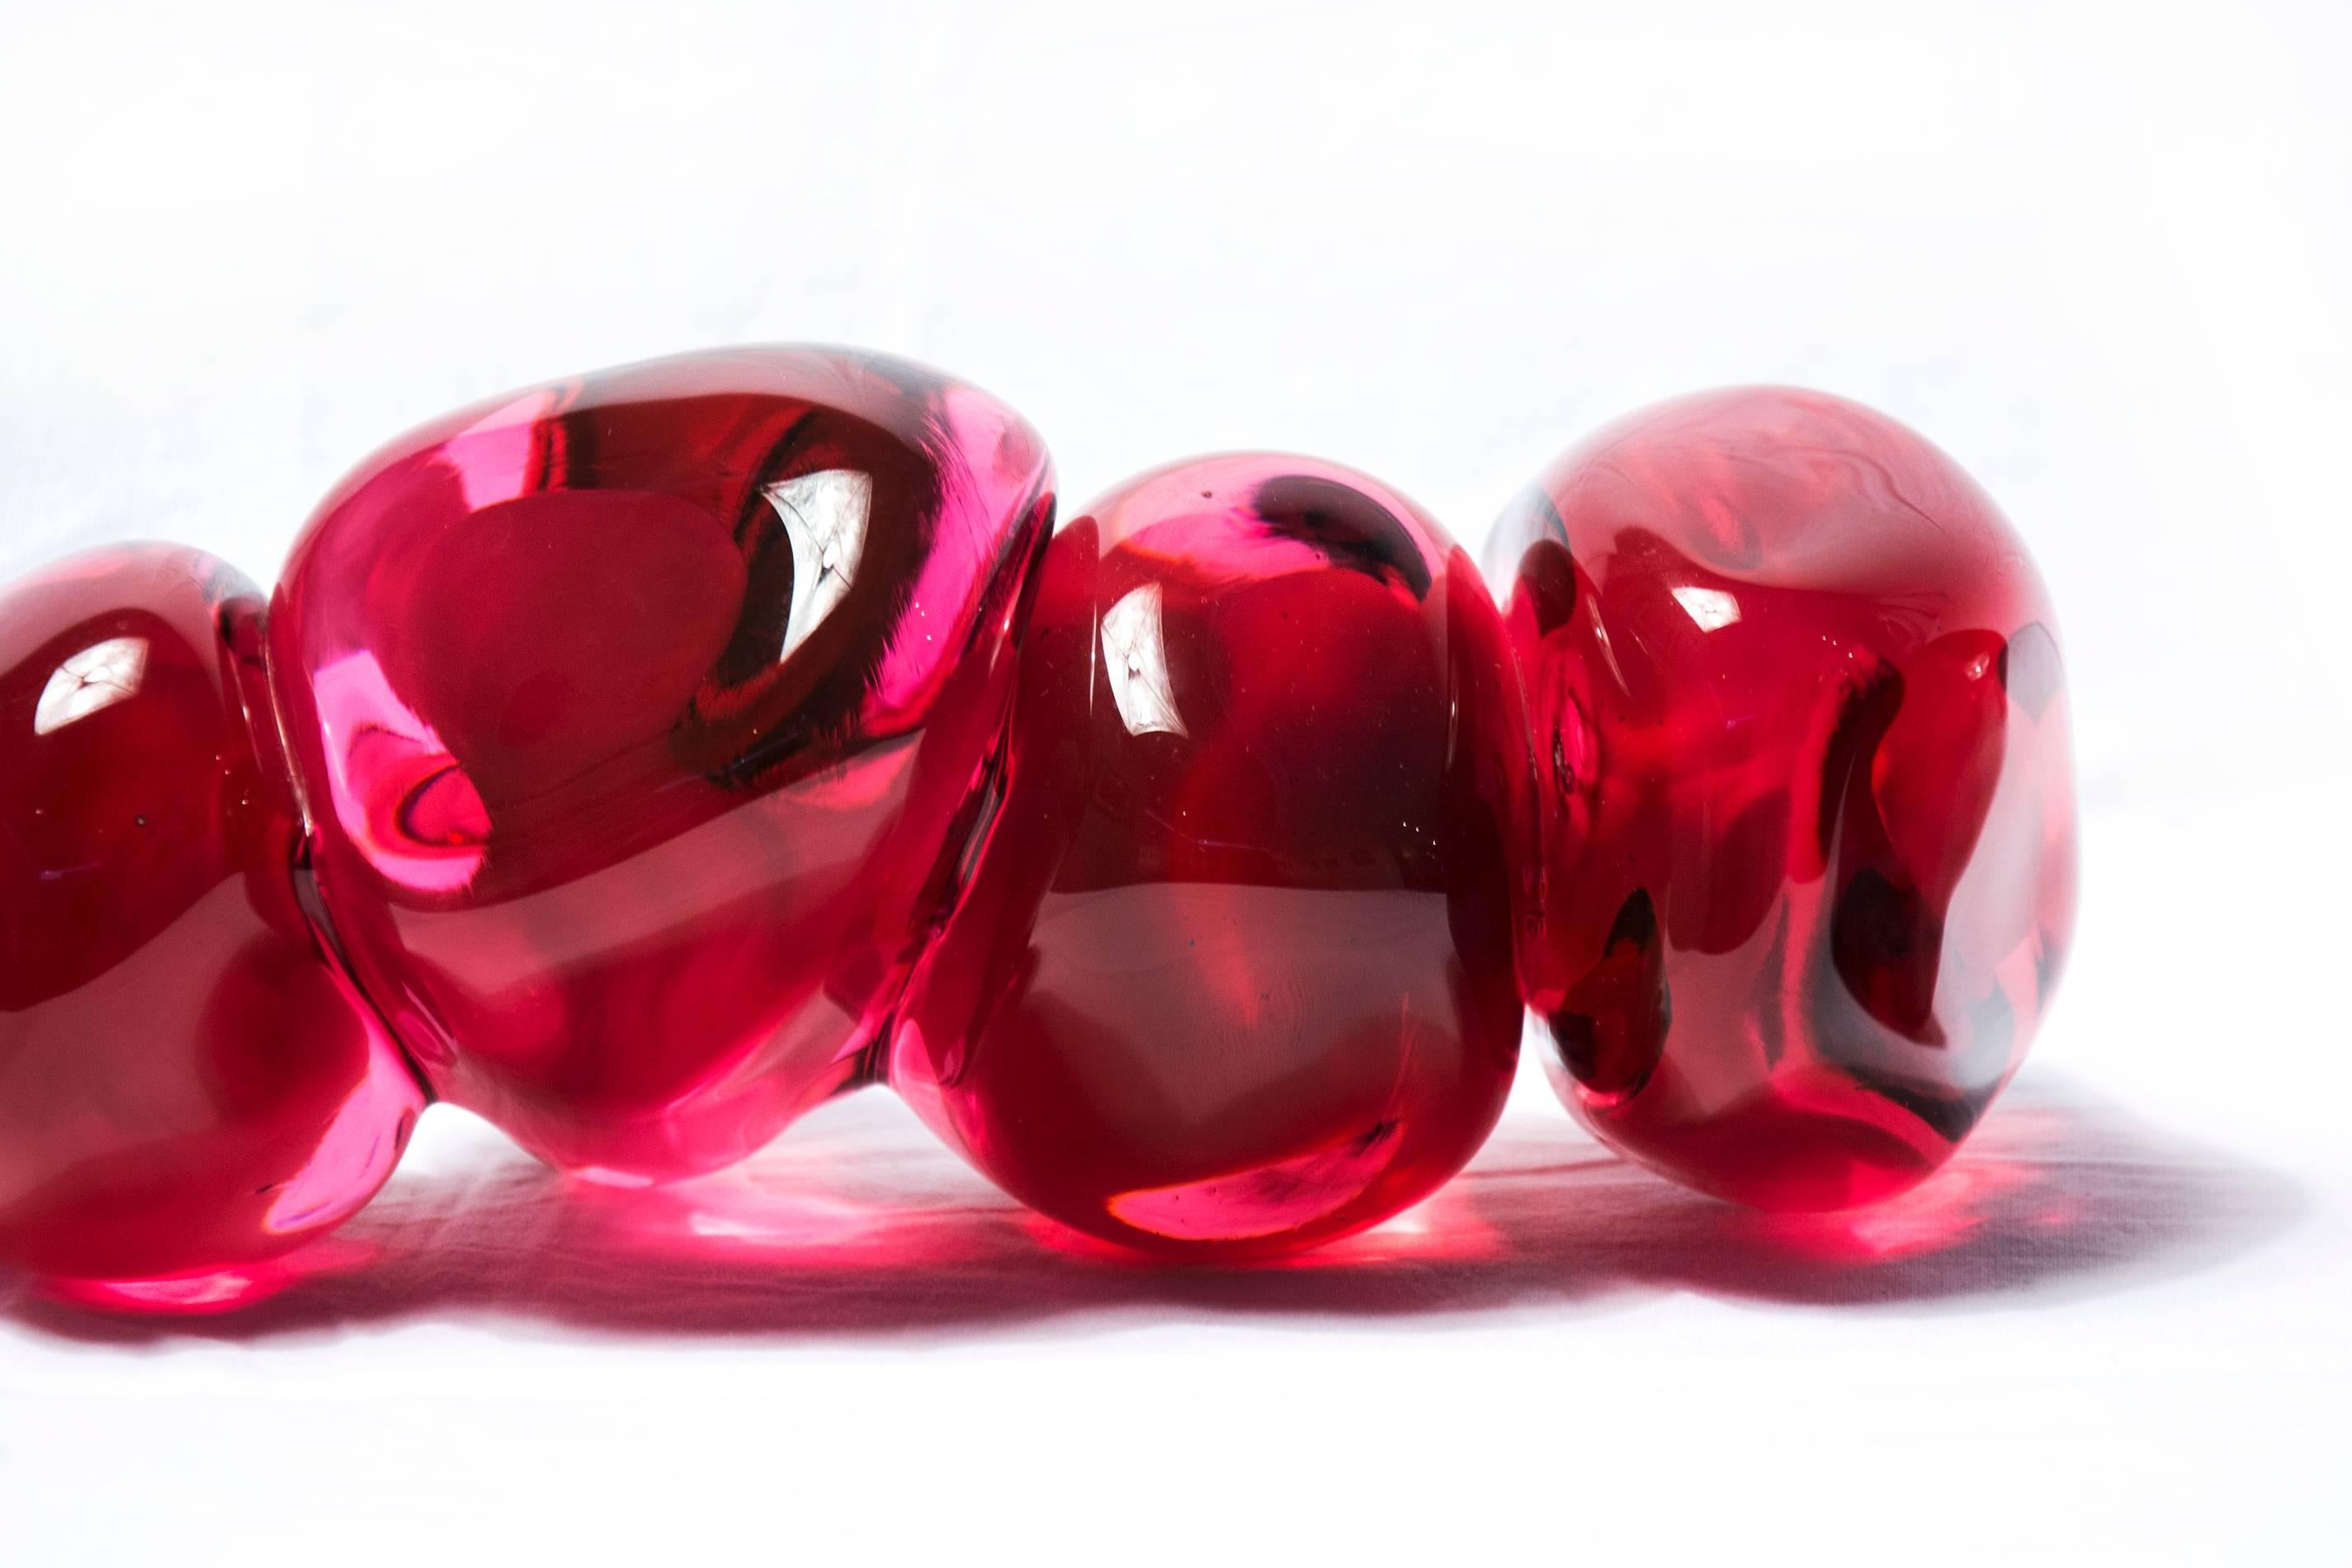 Persephone's Six Seeds - bright, red, pomegranate, glass, still life sculpture - Contemporary Sculpture by Catherine Vamvakas Lay